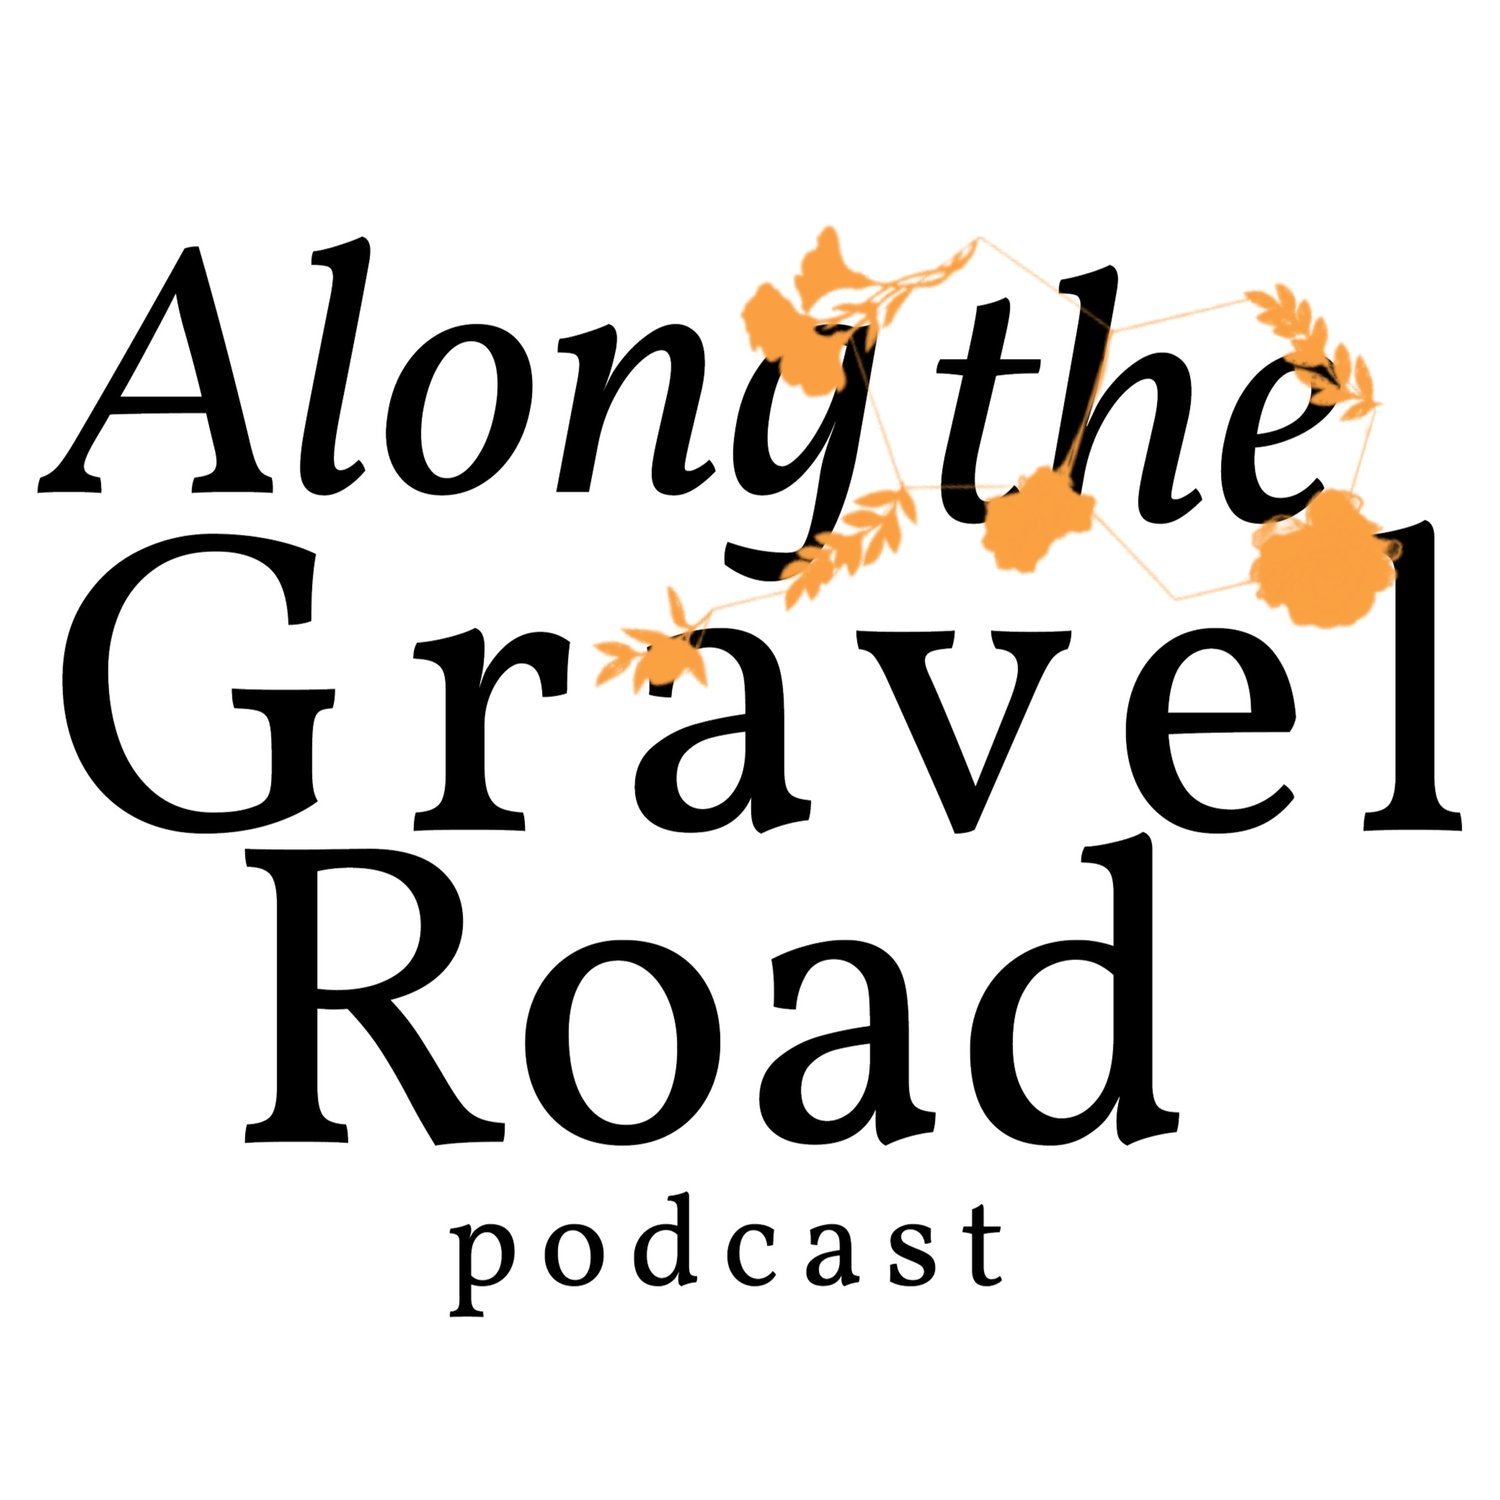 Along the Gravel Road Podcast